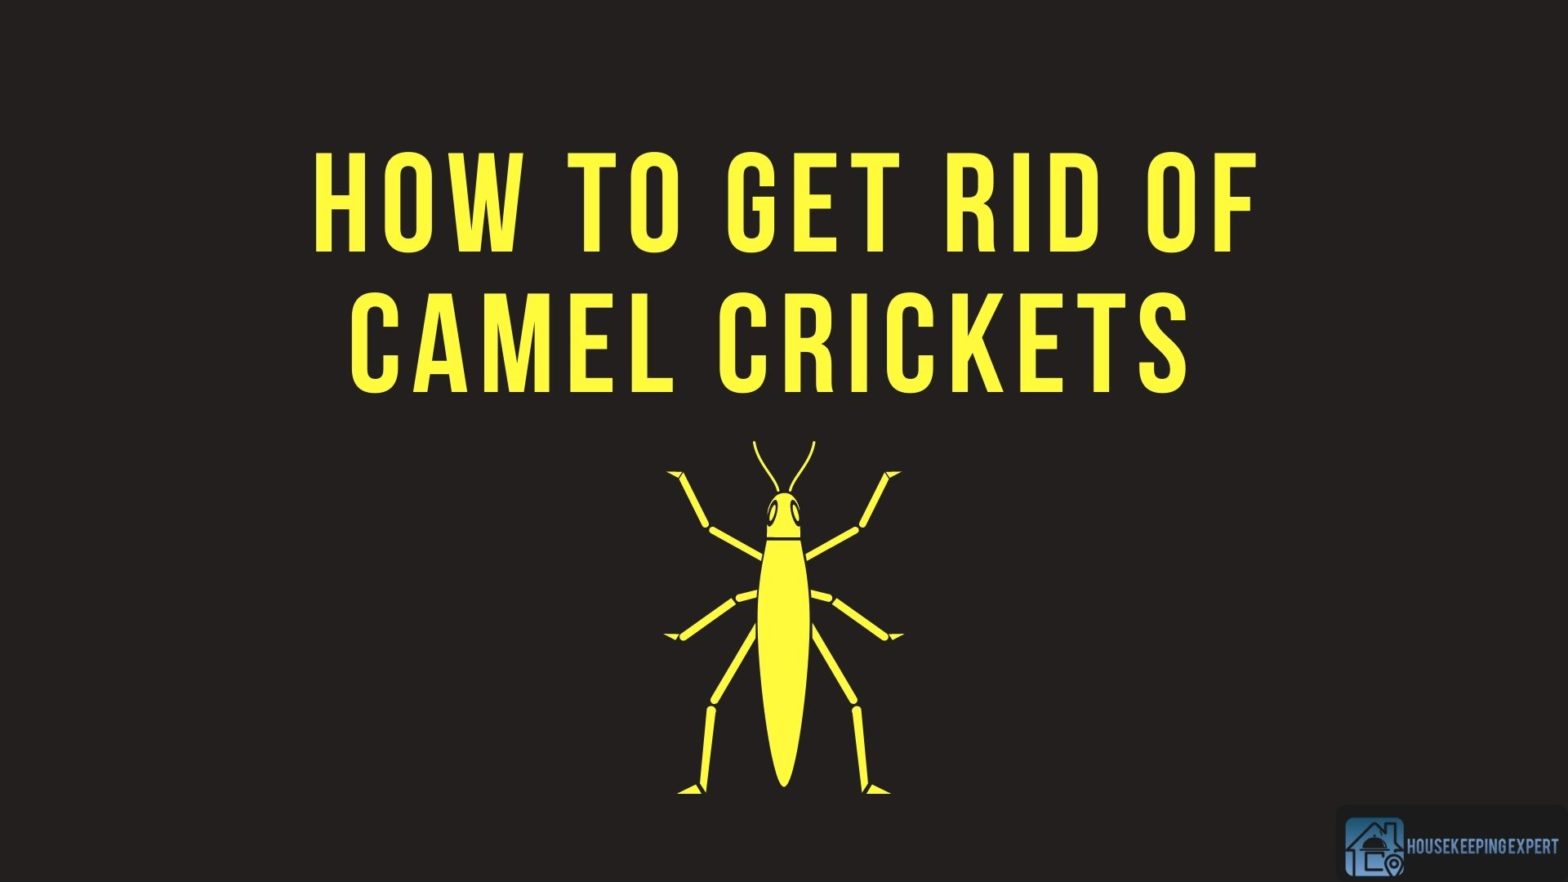 How To Get Rid Of Camel Crickets